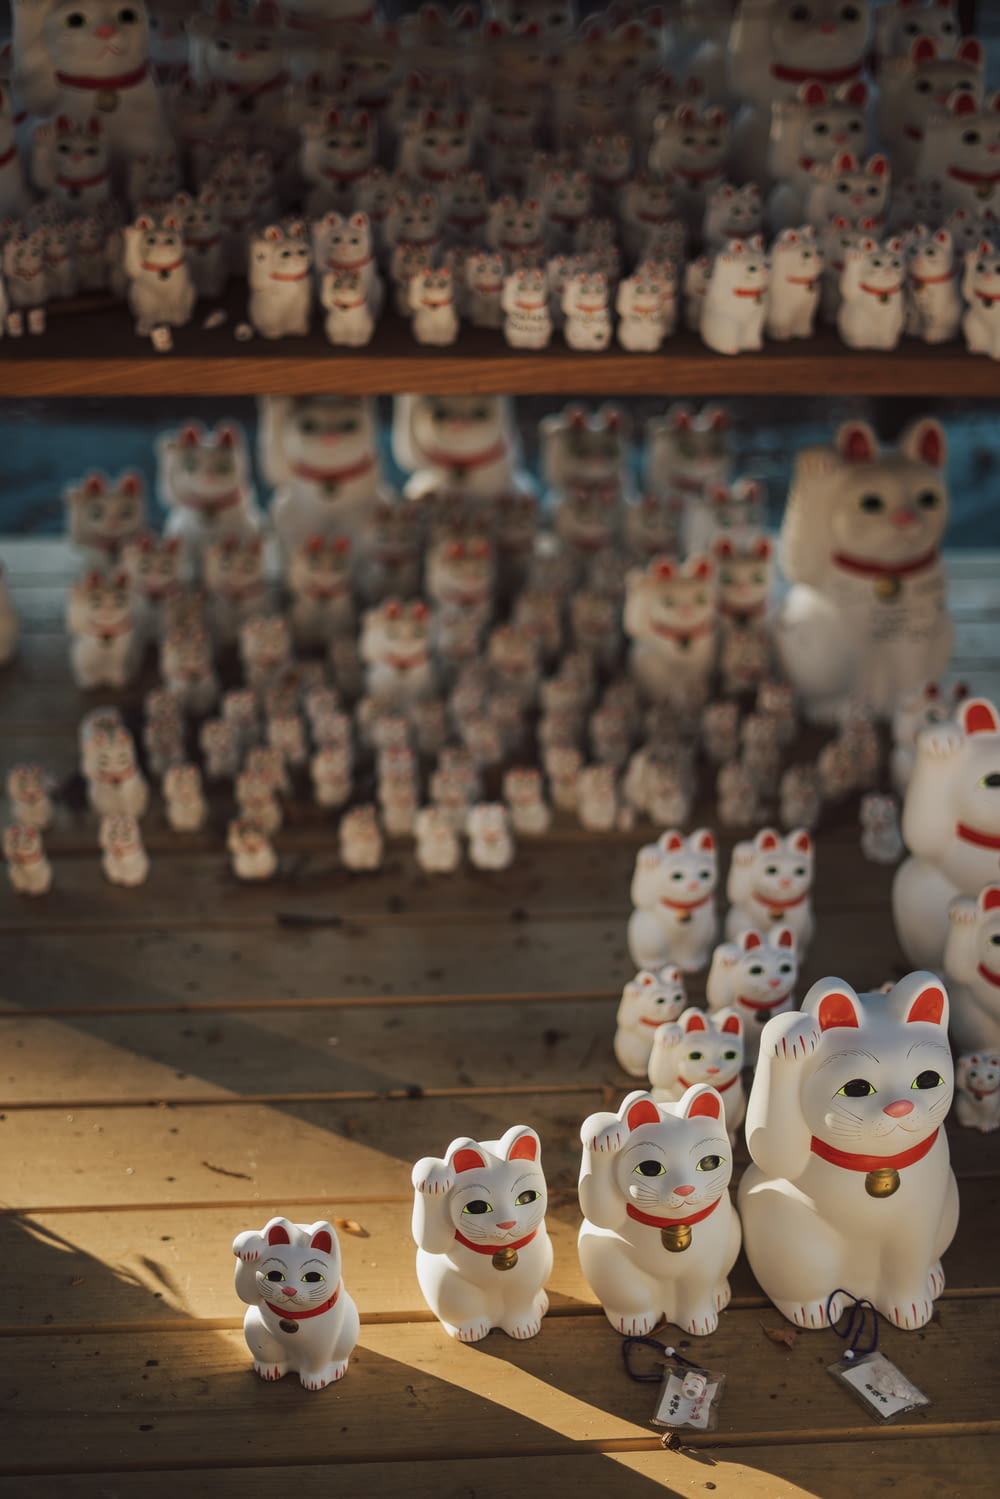 a group of white cat figurines sitting on top of a wooden floor